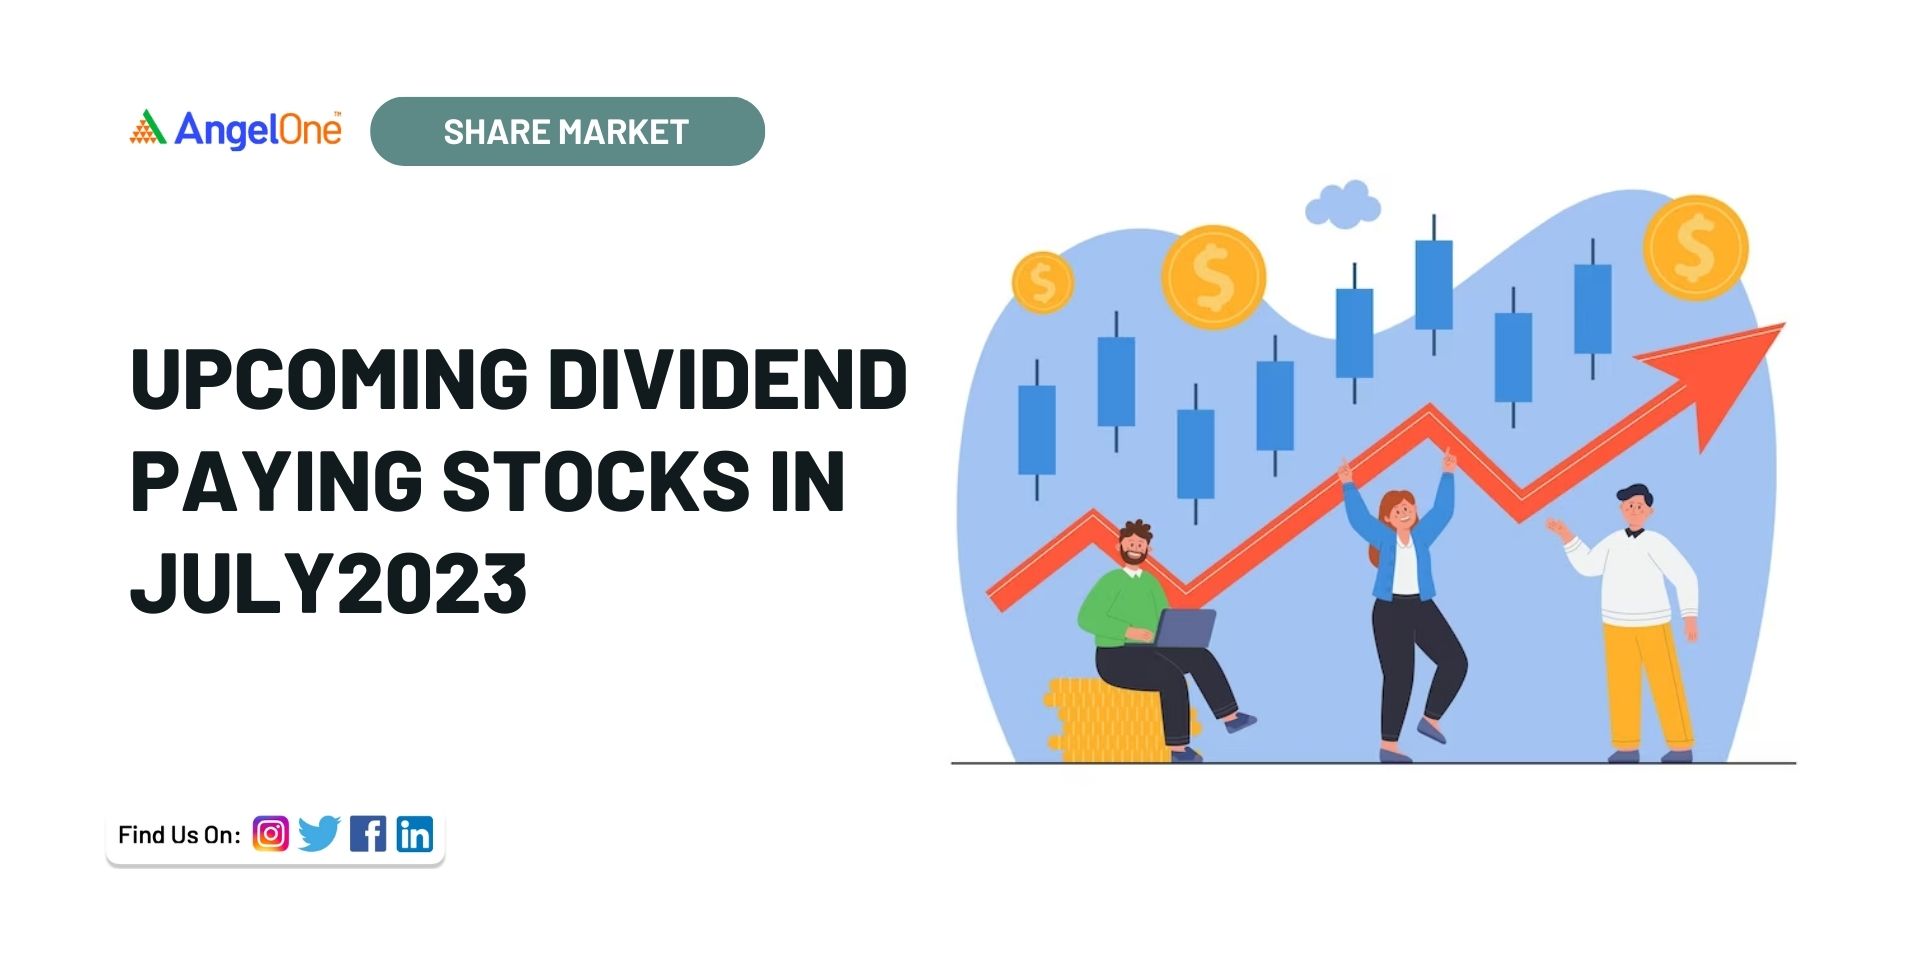 forthcoming mutual fund dividend announcement